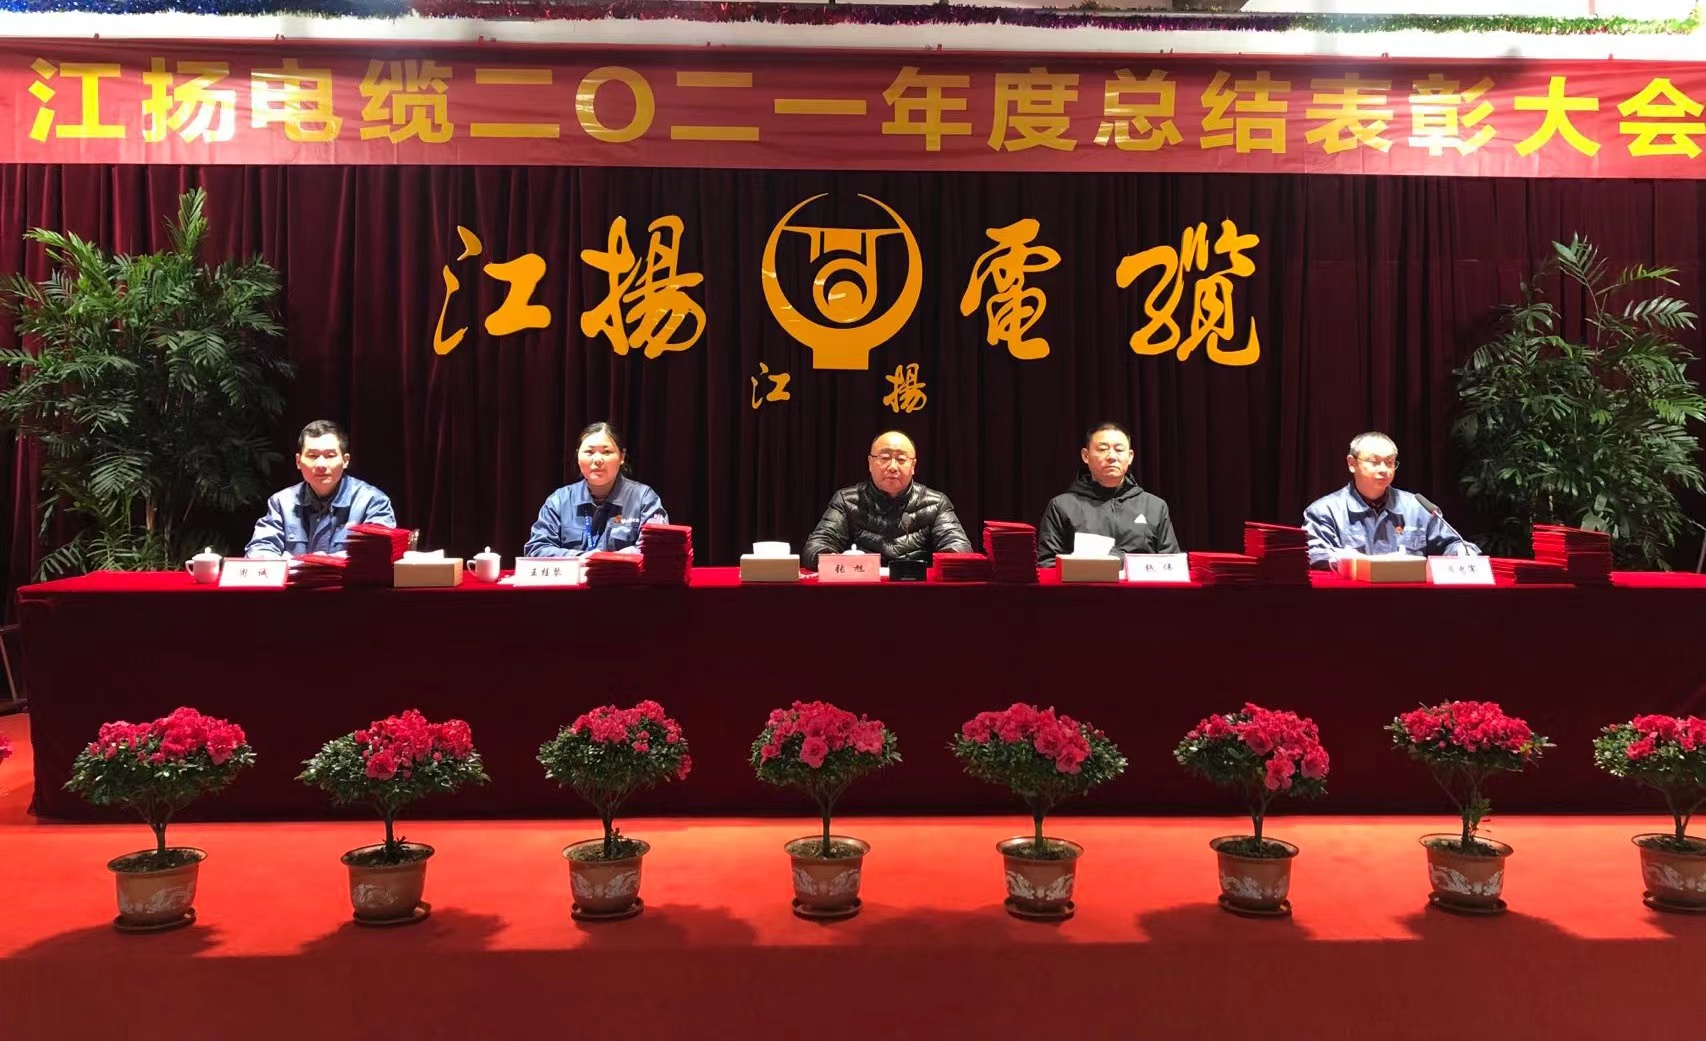 Warm congratulations to Jiangyang Cable on the successful convening of the 2021 Annual Summary and Commendation Conference